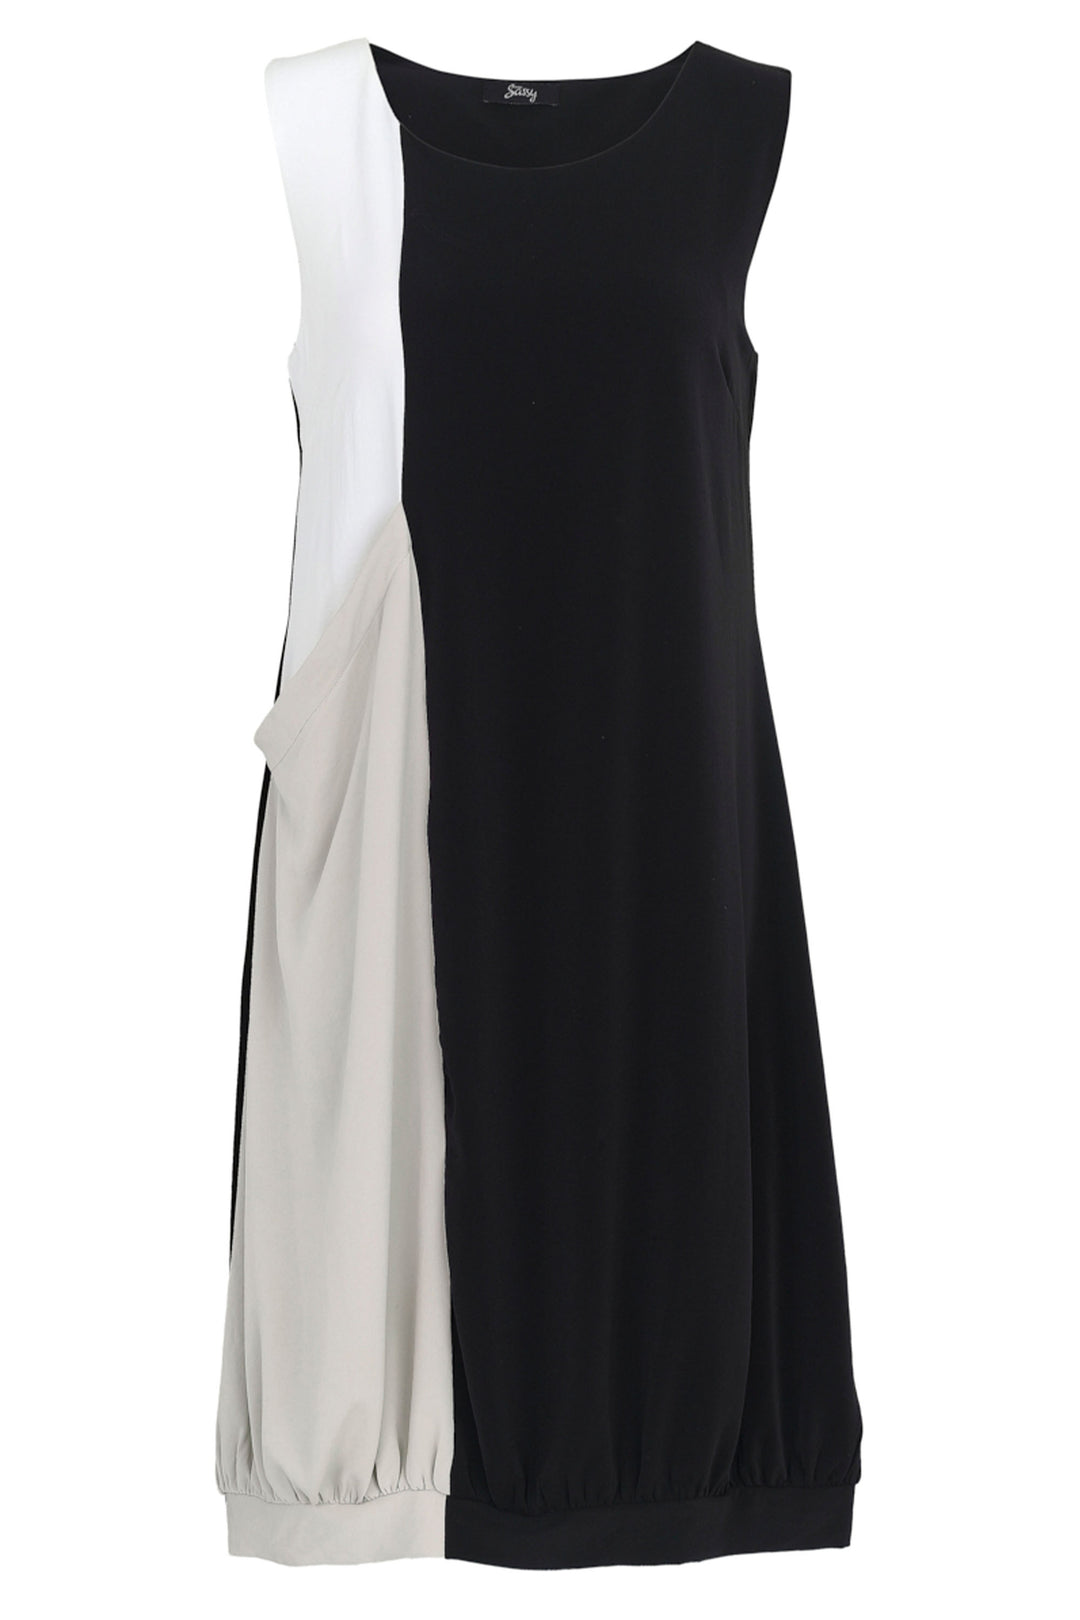 Ever Sassy Spring 2024 crafted from stretchy fabric with a classic roundneck, gathered hemline and a touch of white for some variety, this sleeveless dress is perfect for any summer occasion.